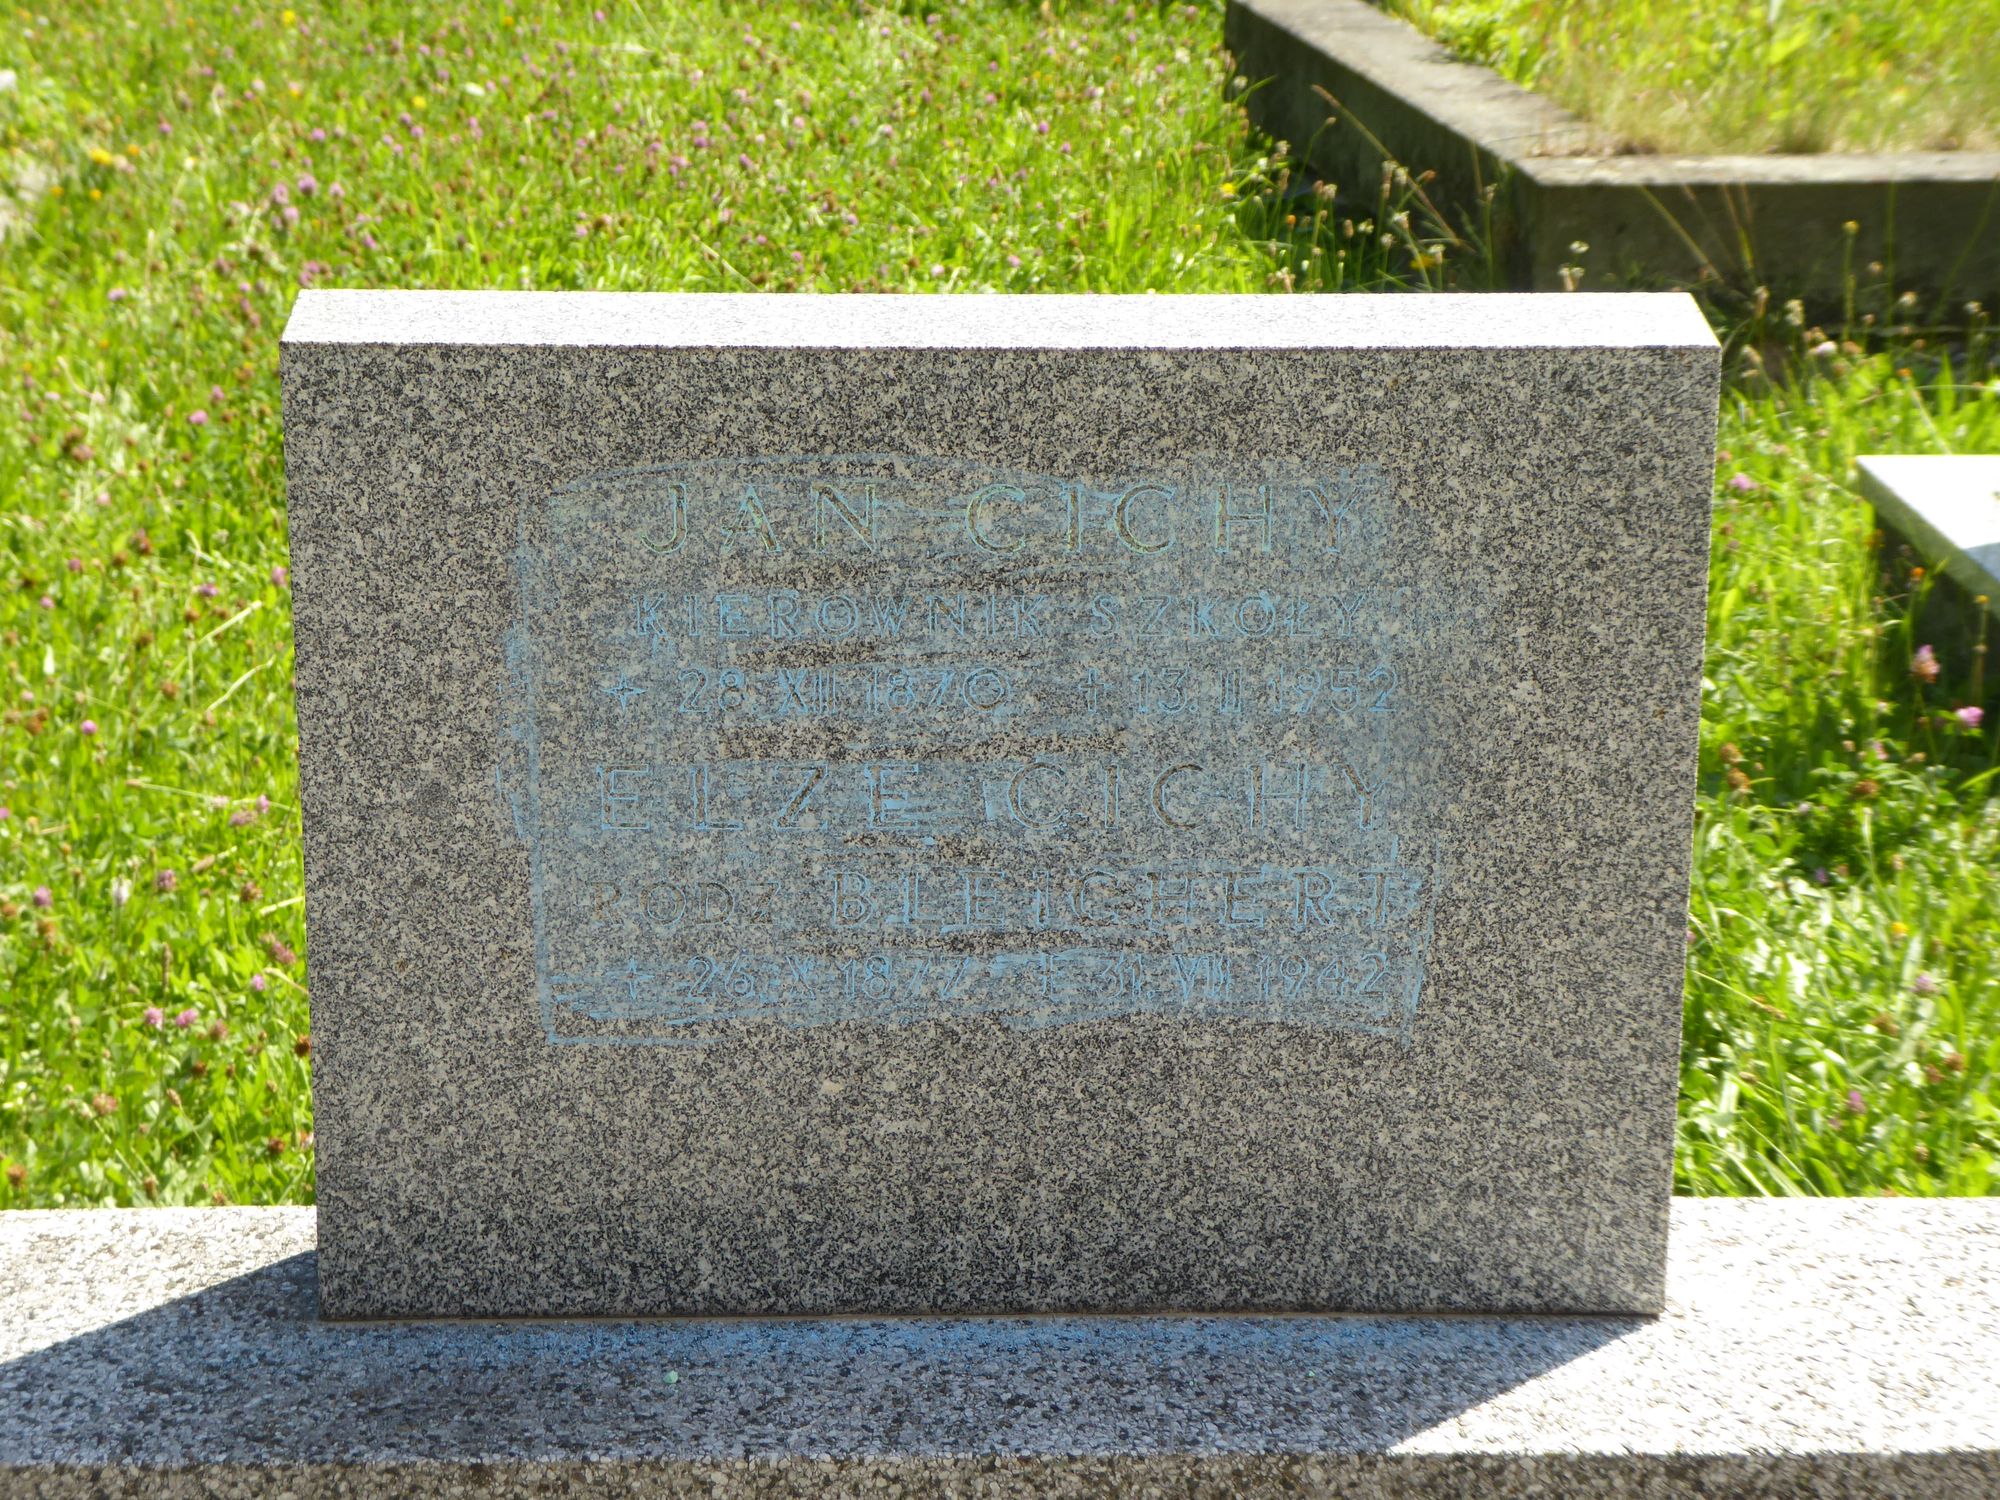 Fragment of the gravestone of Jan Cichy and Elze Cichy from the cemetery of the Czech part of Těšín Silesia, as of 2022.